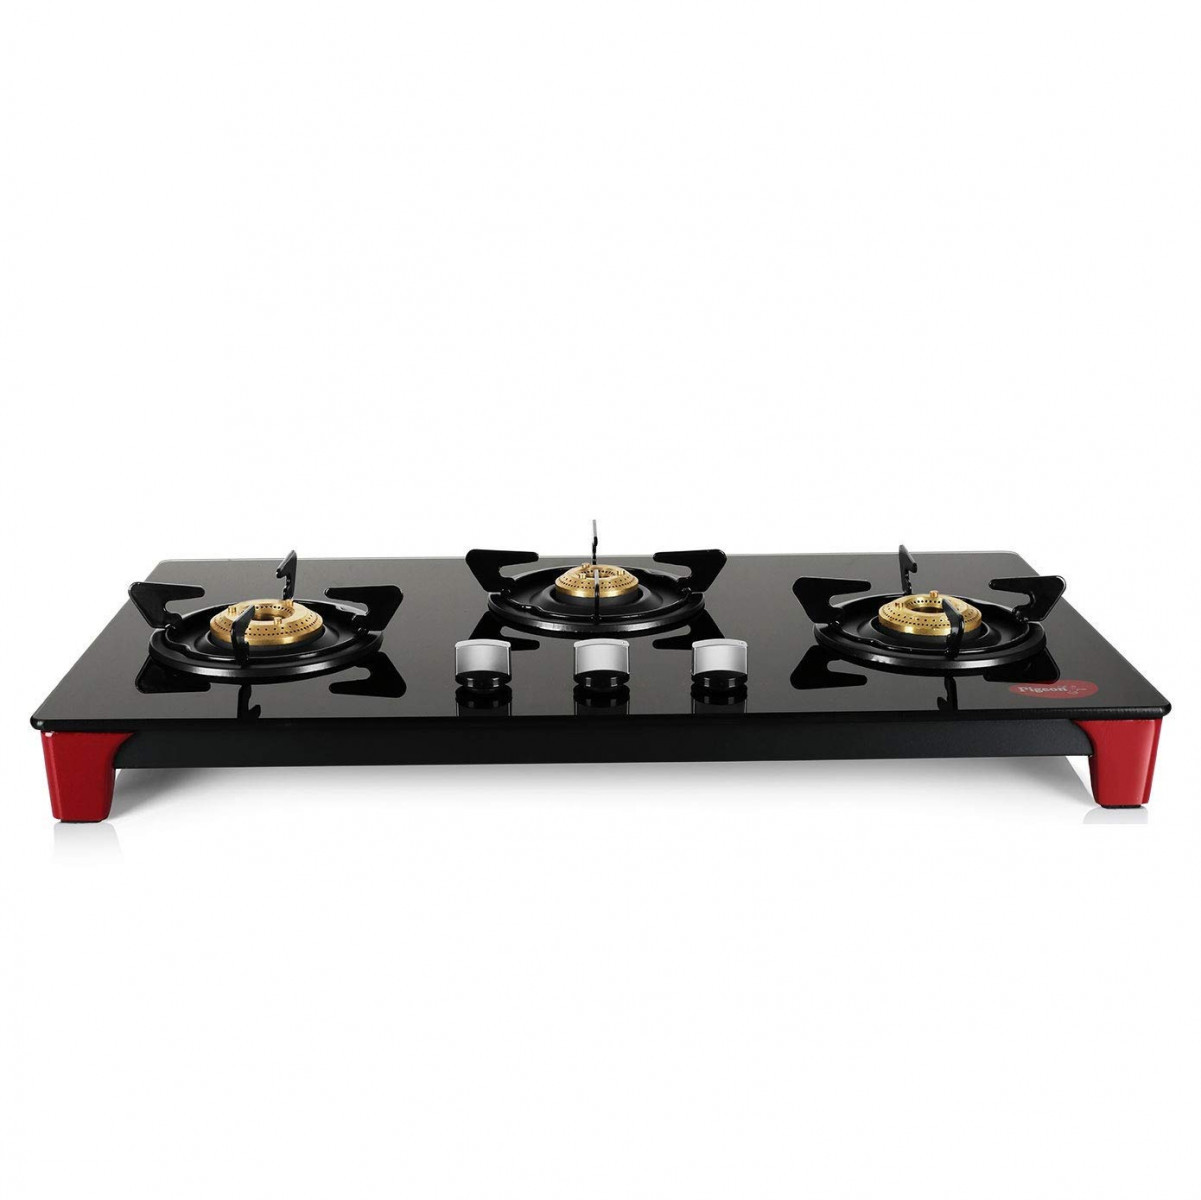 Pigeon Infinity Glass Stove Cooktop with Glass Top and Stainless Steel body 3 Burner Gas Stove Manual Ignition Black